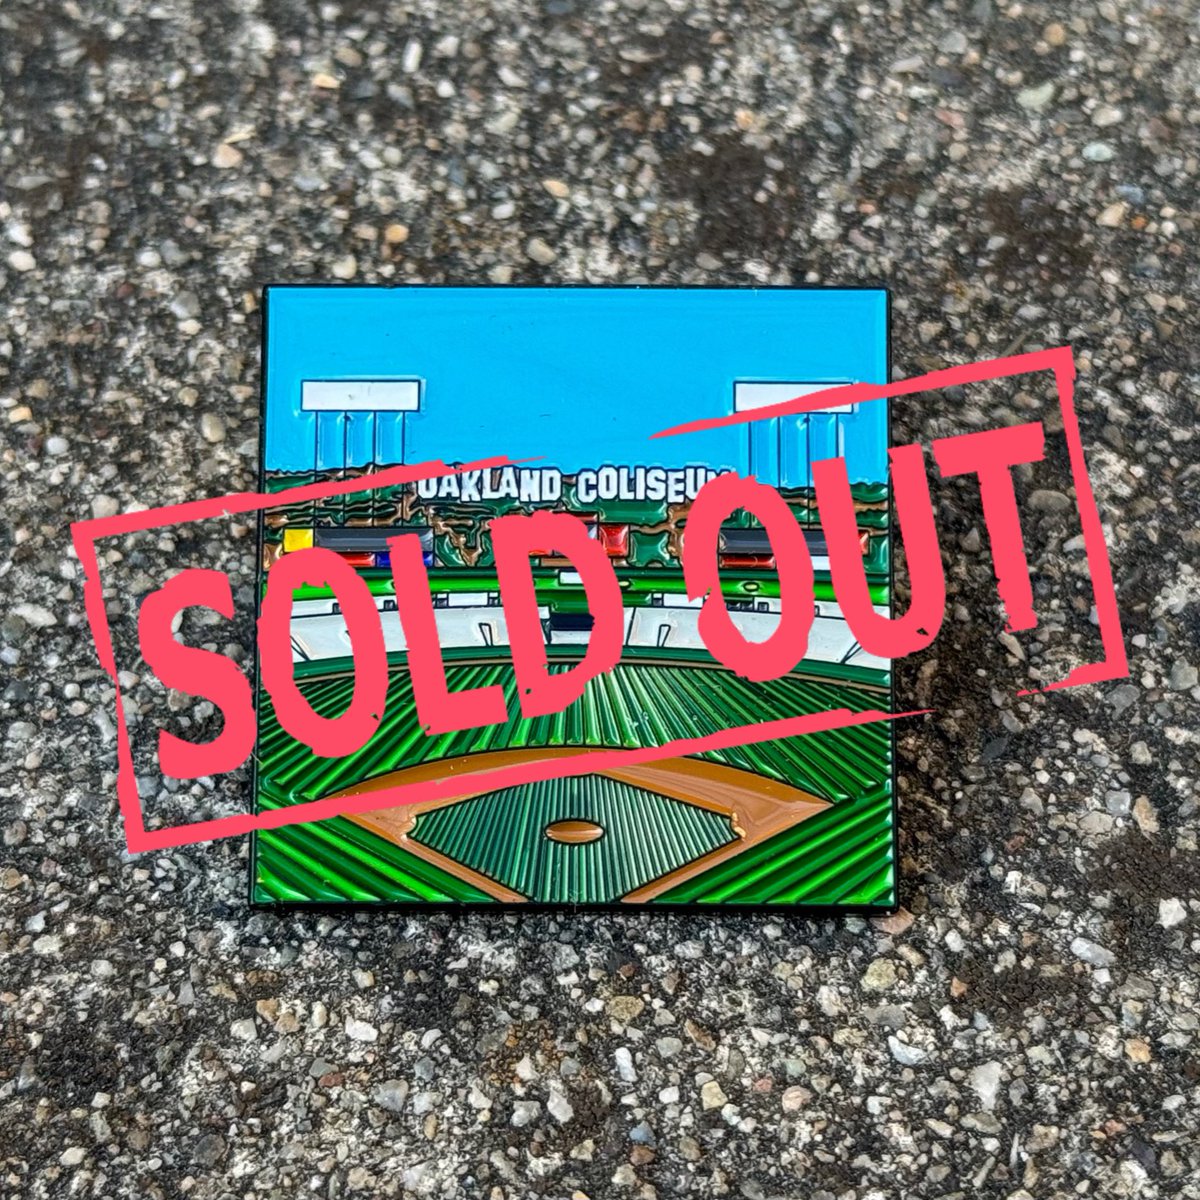 Aaaaand that’s a wrap! We’re all sold out! Thank you to all that got one as this really is in our opinion the best pin we’ve ever done!